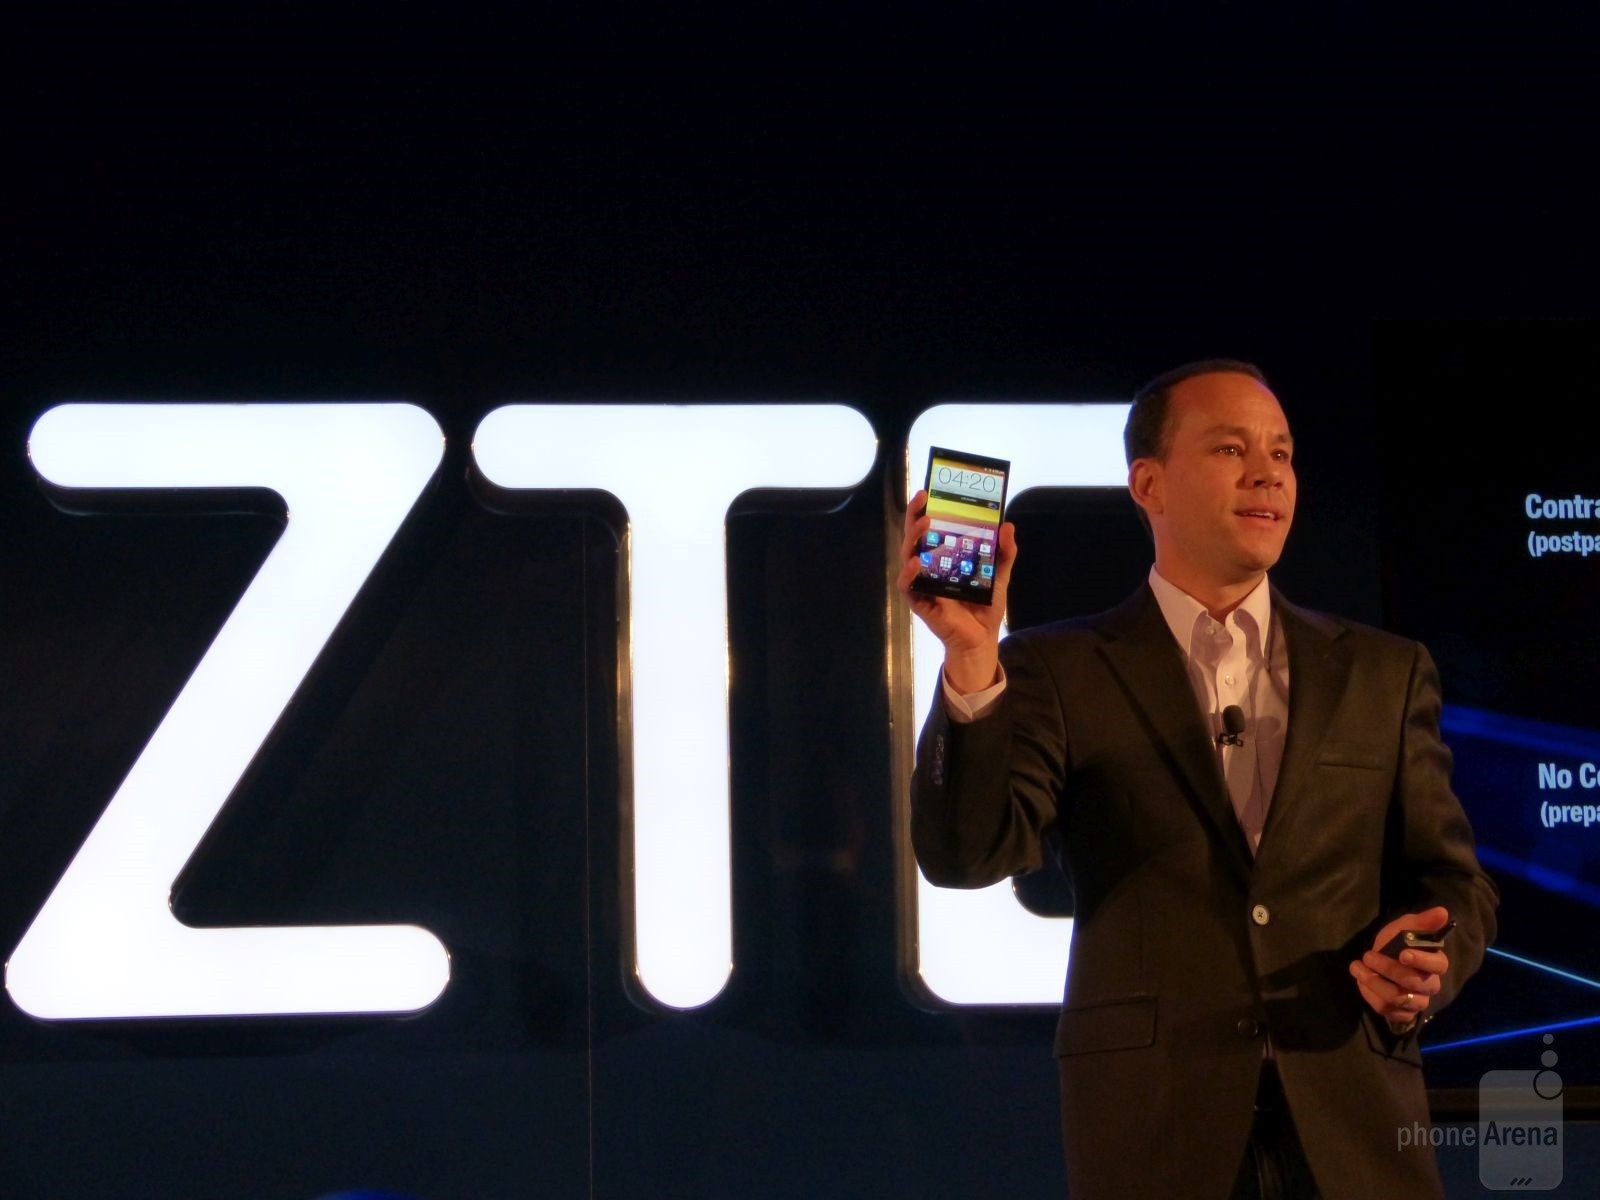 ZTE USA VP - Technology Planning and Partners, Jeff Yee, introduces the new Grand X Max+ for Cricket, on sales now for just $200 and no contract - From CES 2015 – Brands to watch in the US: ZTE (part 2 of 2)